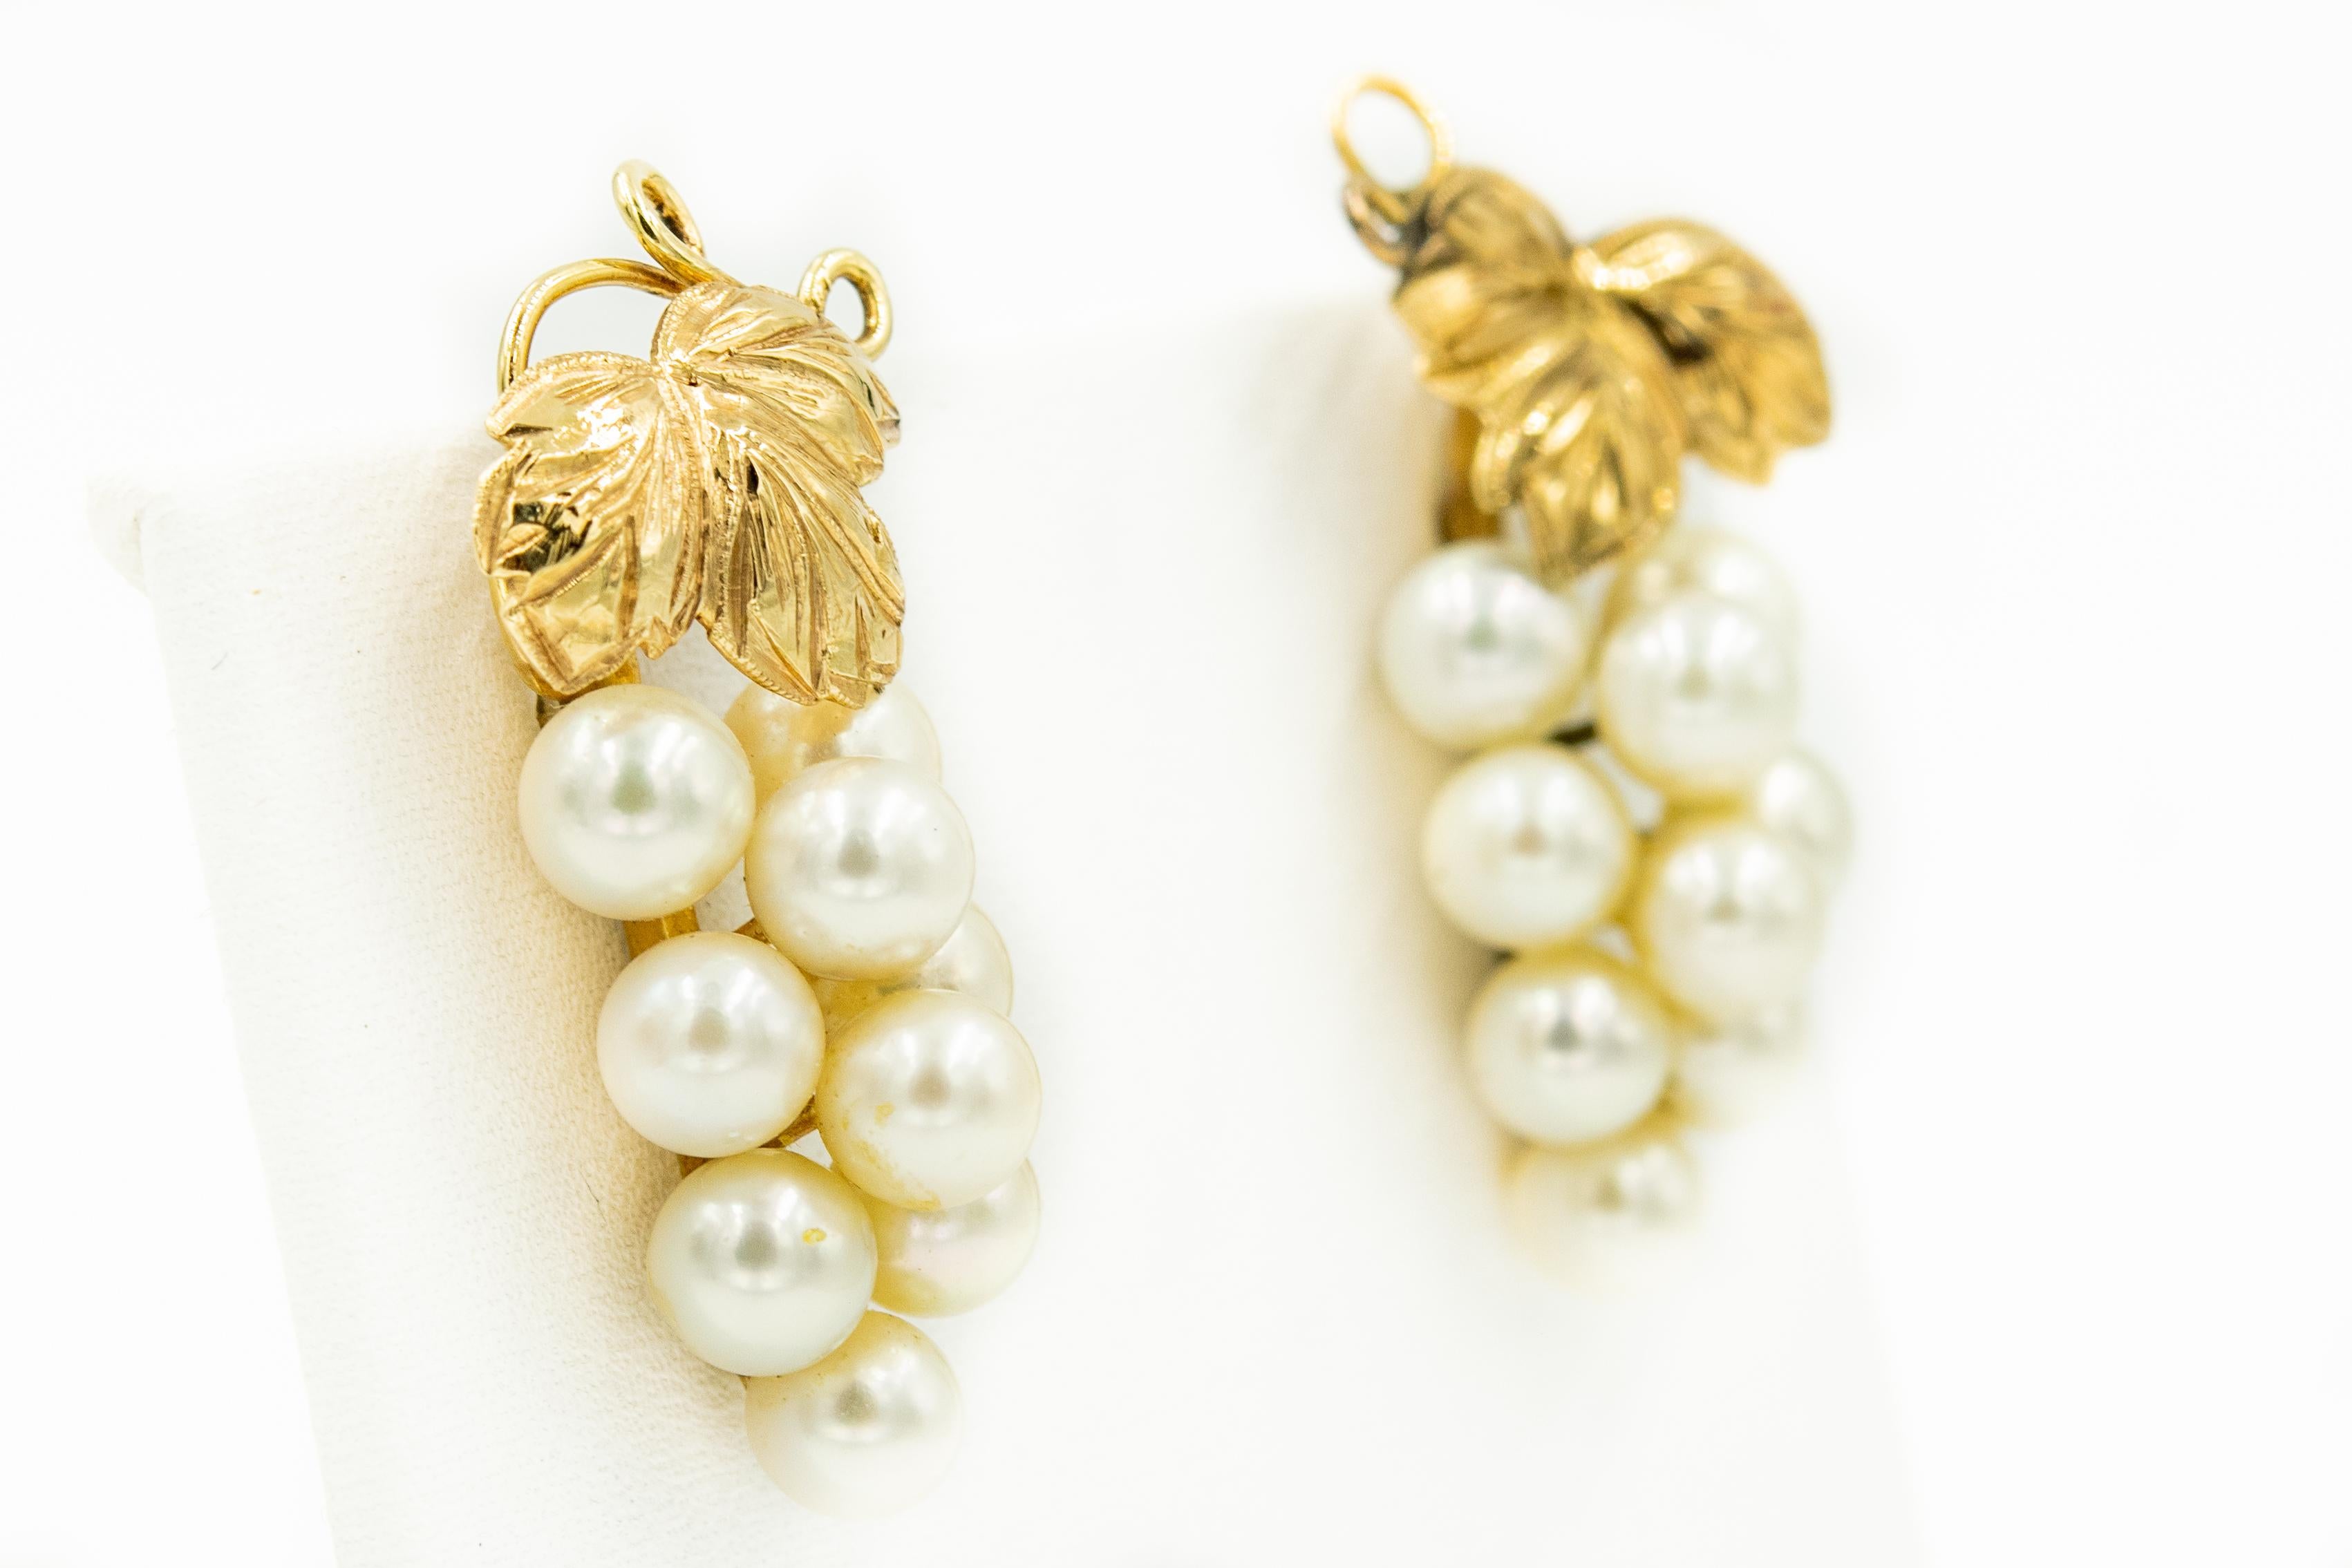 Lovely grape earrings each composed of 9 cultured pearls (approximately 5.5mm each) that hang from 3 leaves and gold vines that are made of 14k yellow gold.  The backs of the earrings have a post and come with clear earring backs.